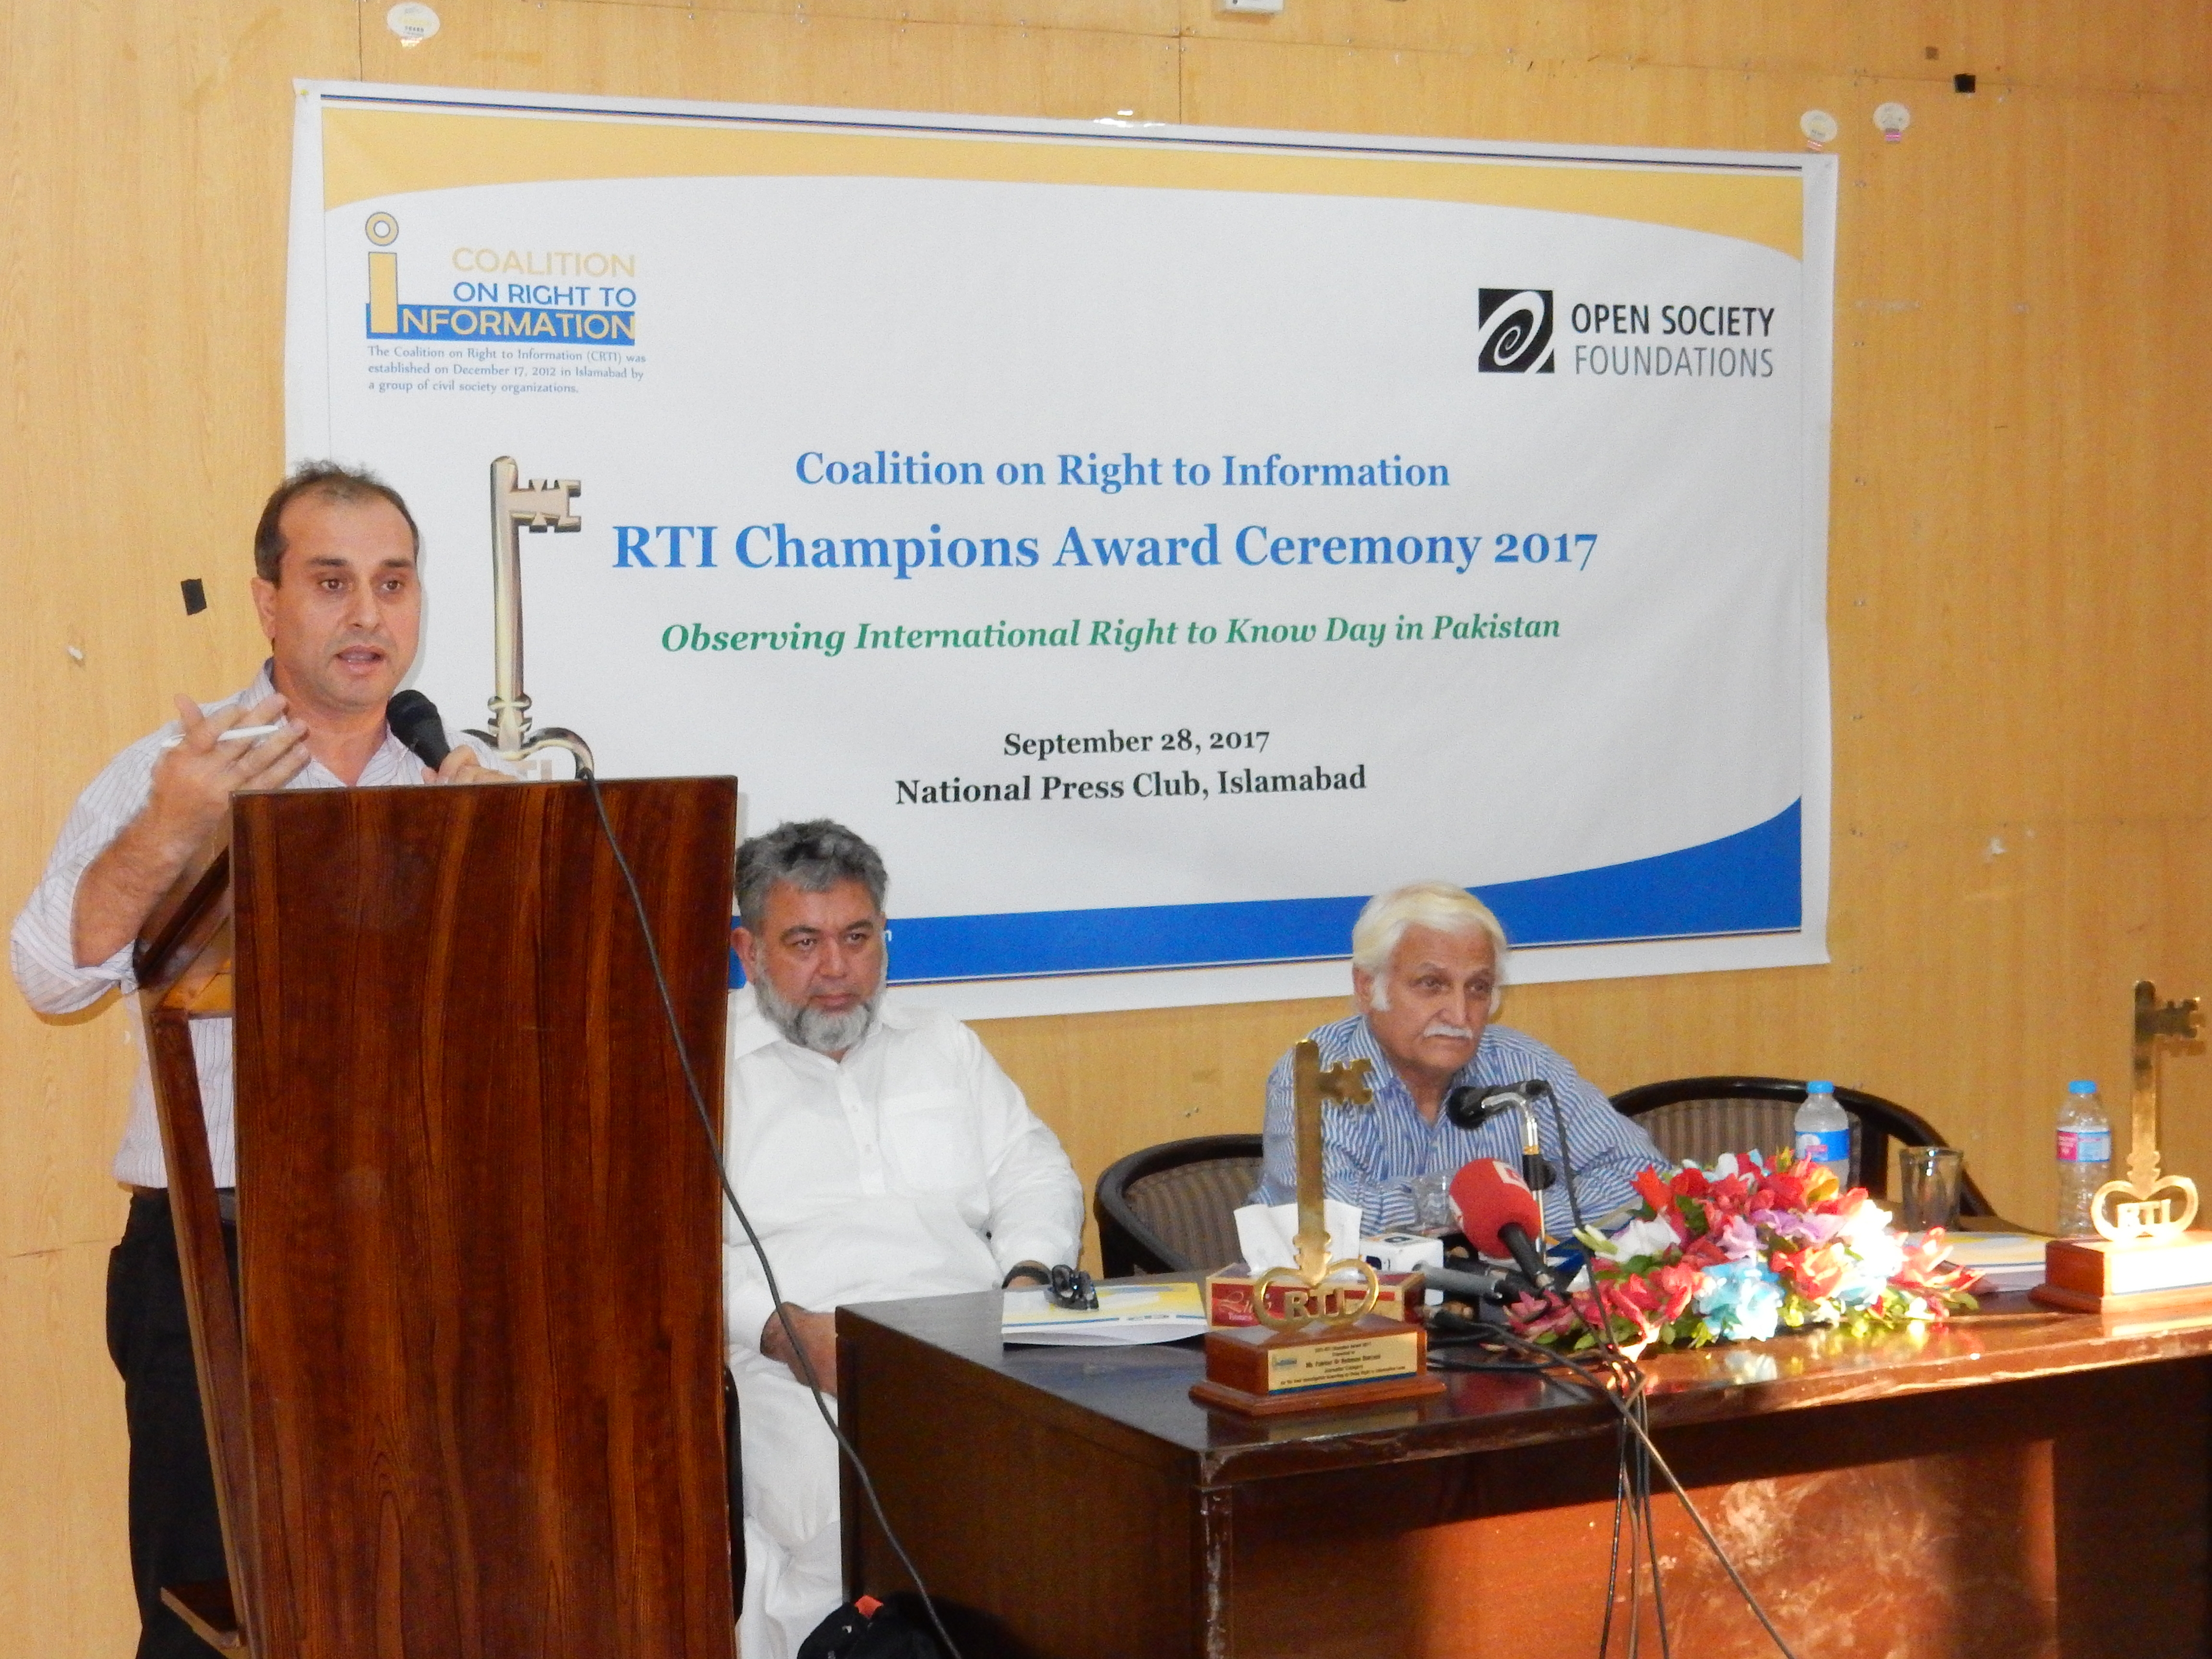 Mr. Anwar, Executive Director, Centre for Governance and Public Accountability, (CGPA) talking about the poor implementation status of existing RTI